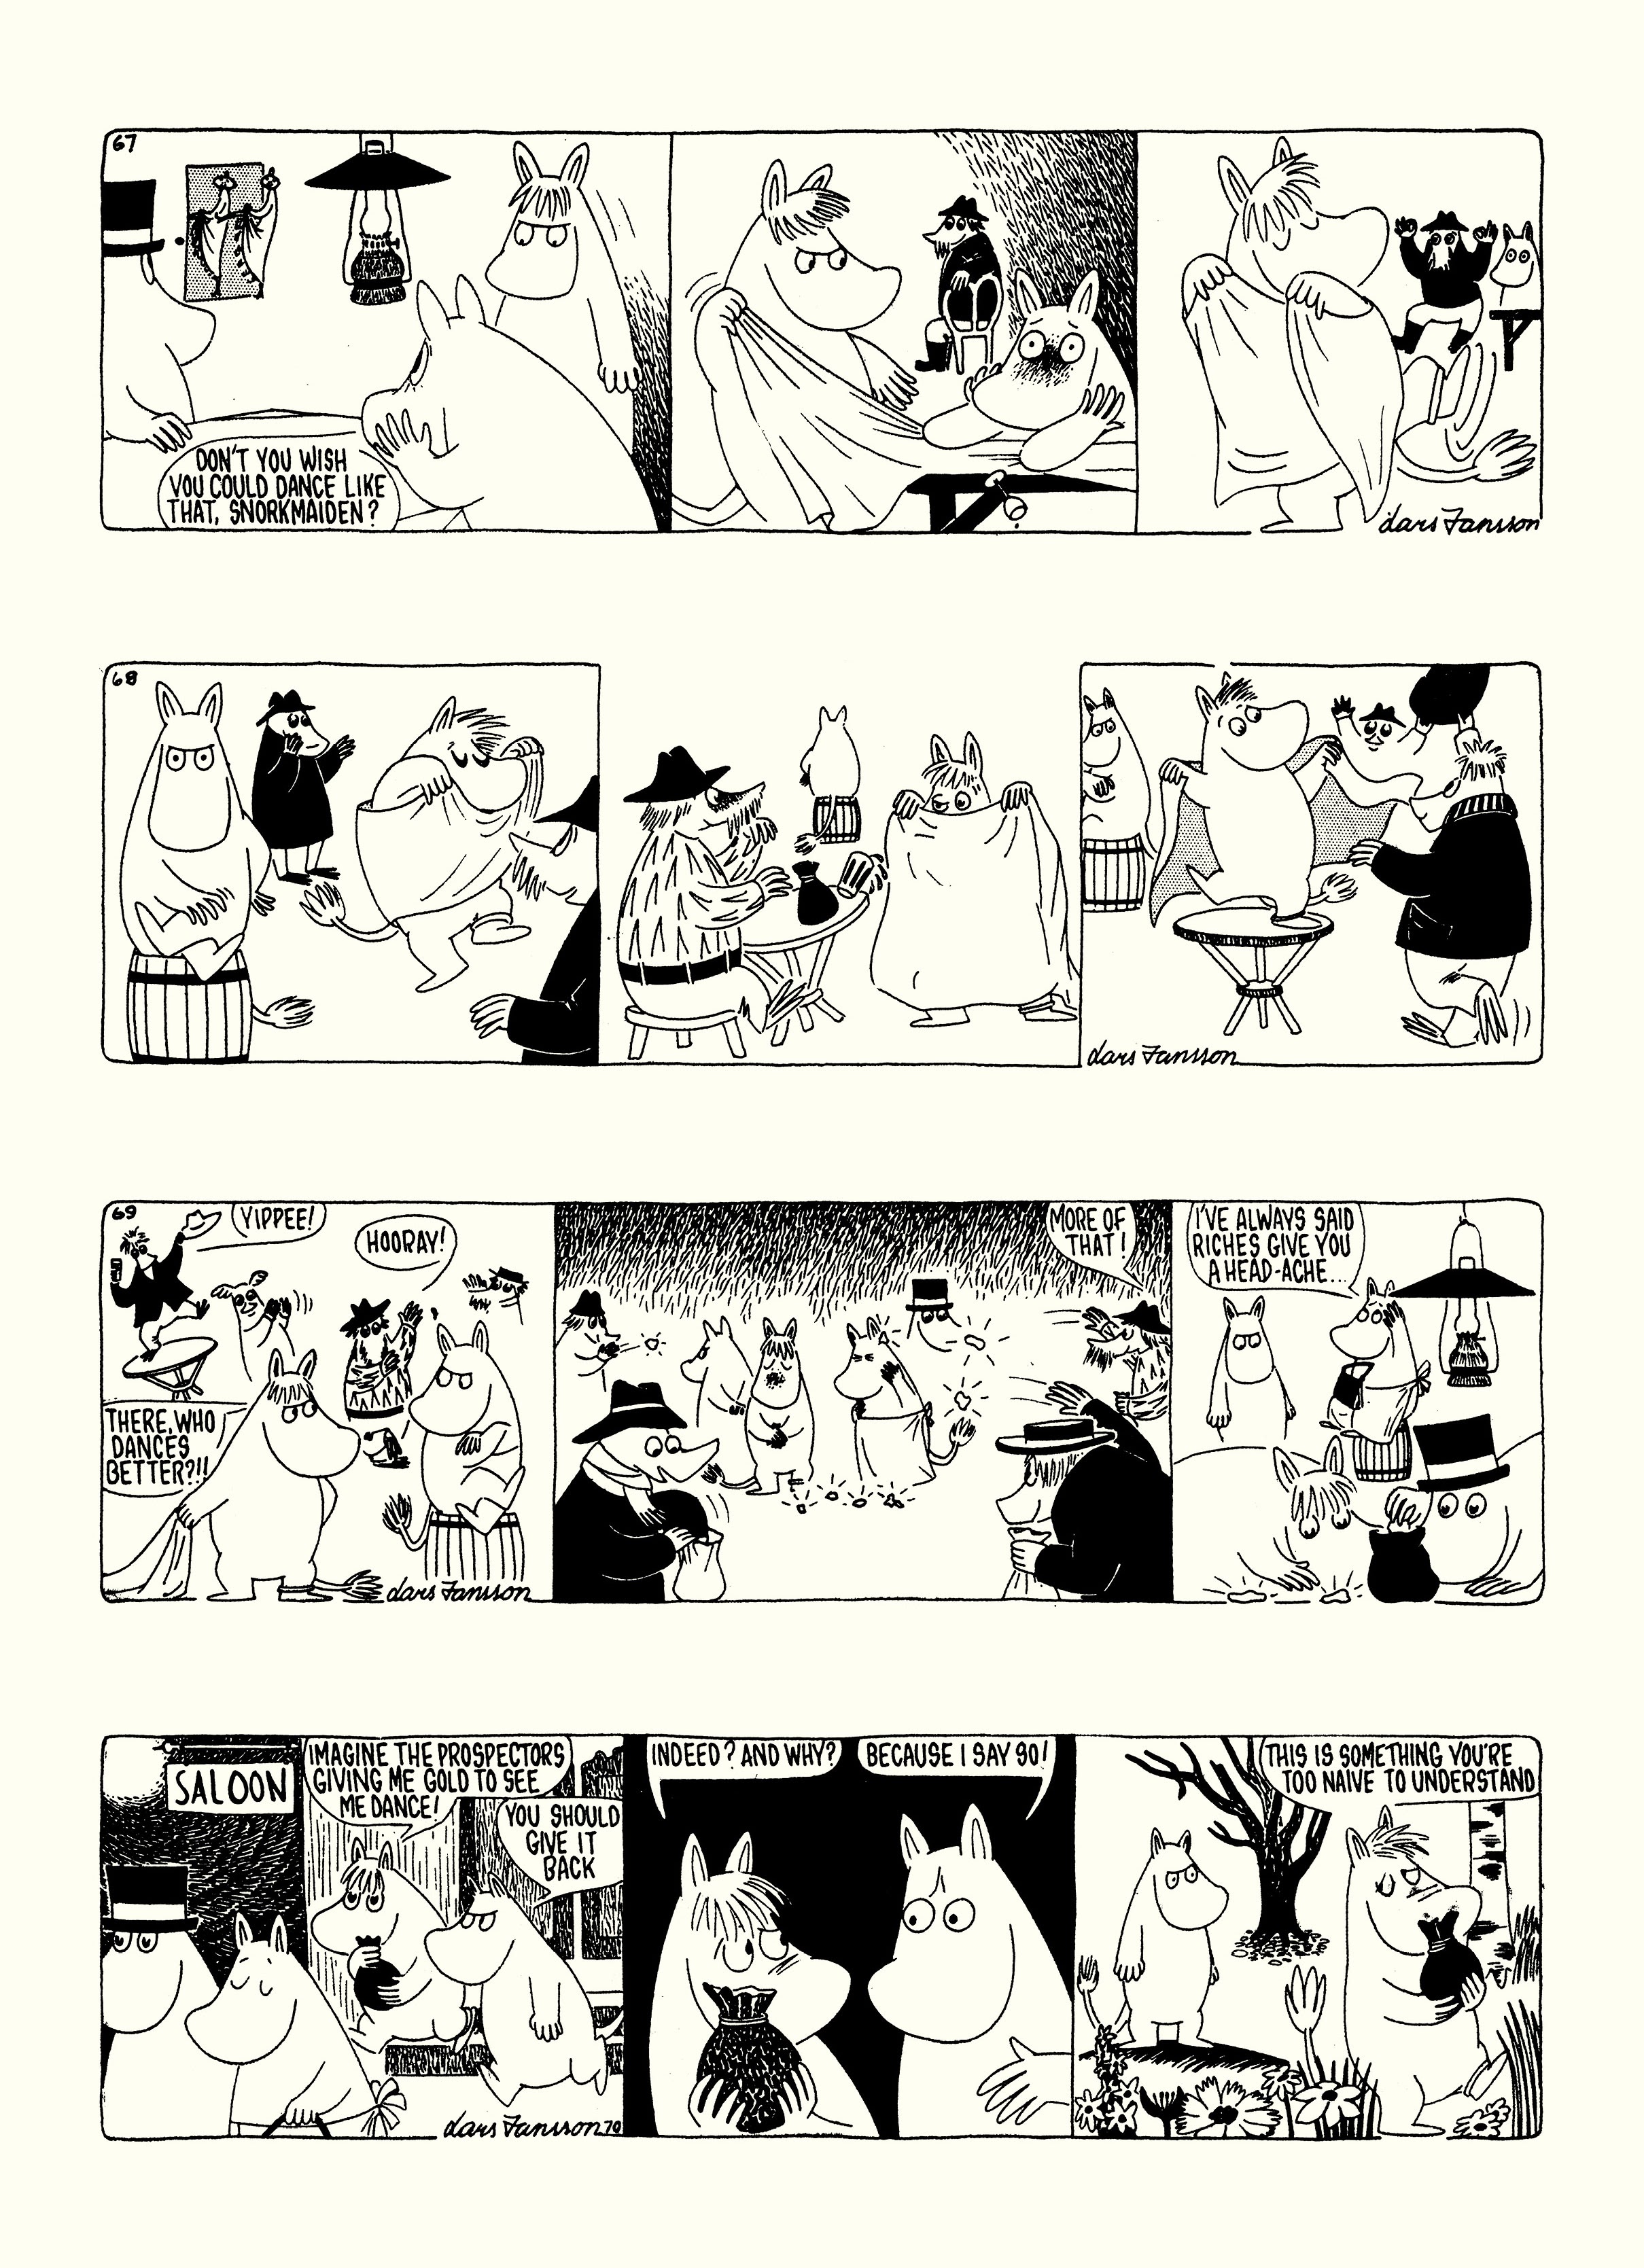 Read online Moomin: The Complete Lars Jansson Comic Strip comic -  Issue # TPB 7 - 86